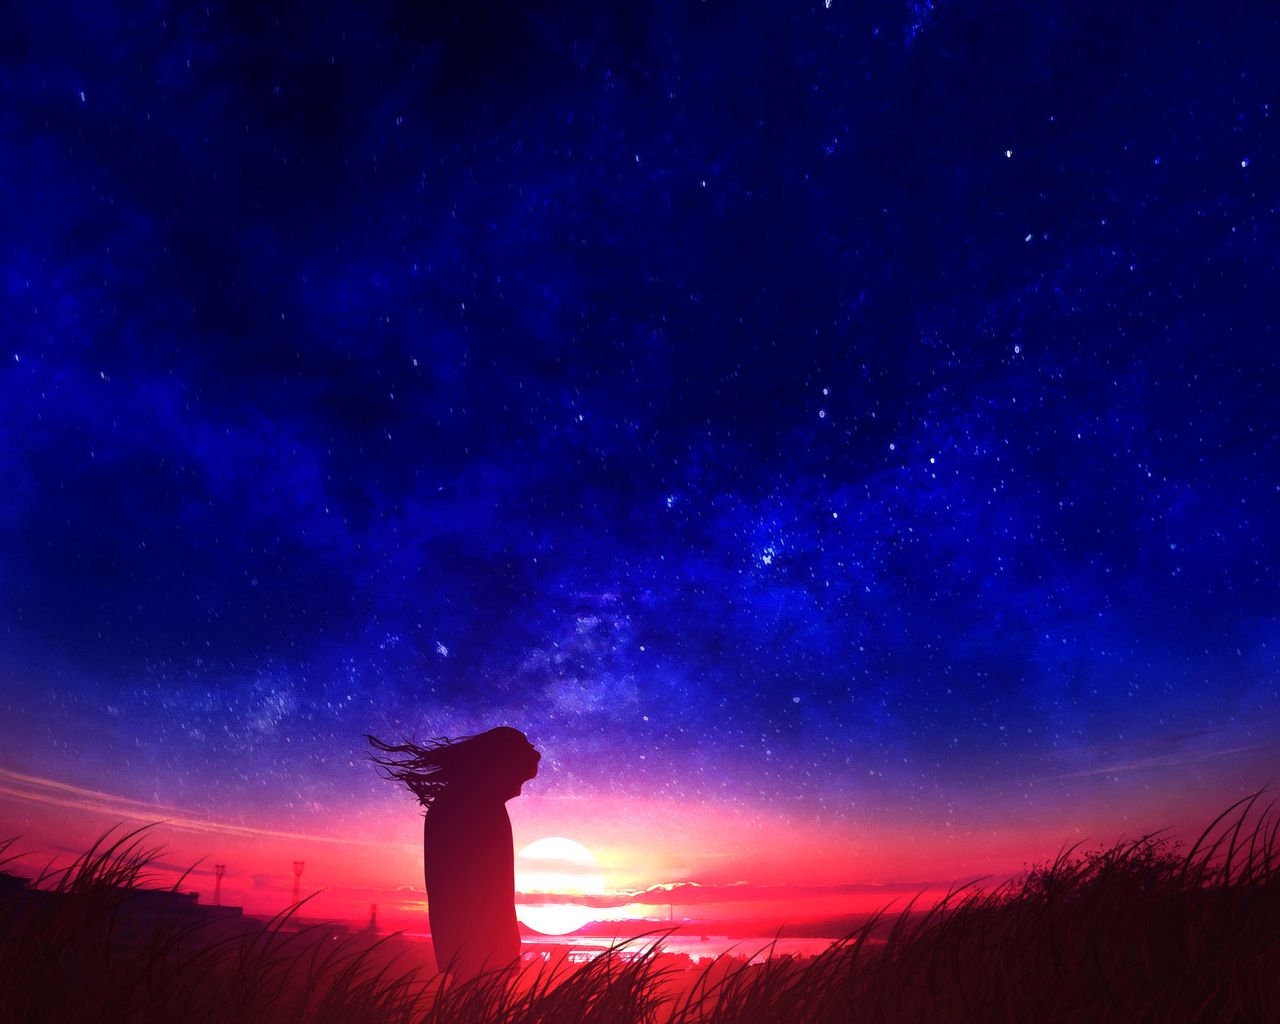 Anime Girl In Field Silhouette Sunset 1280x1024